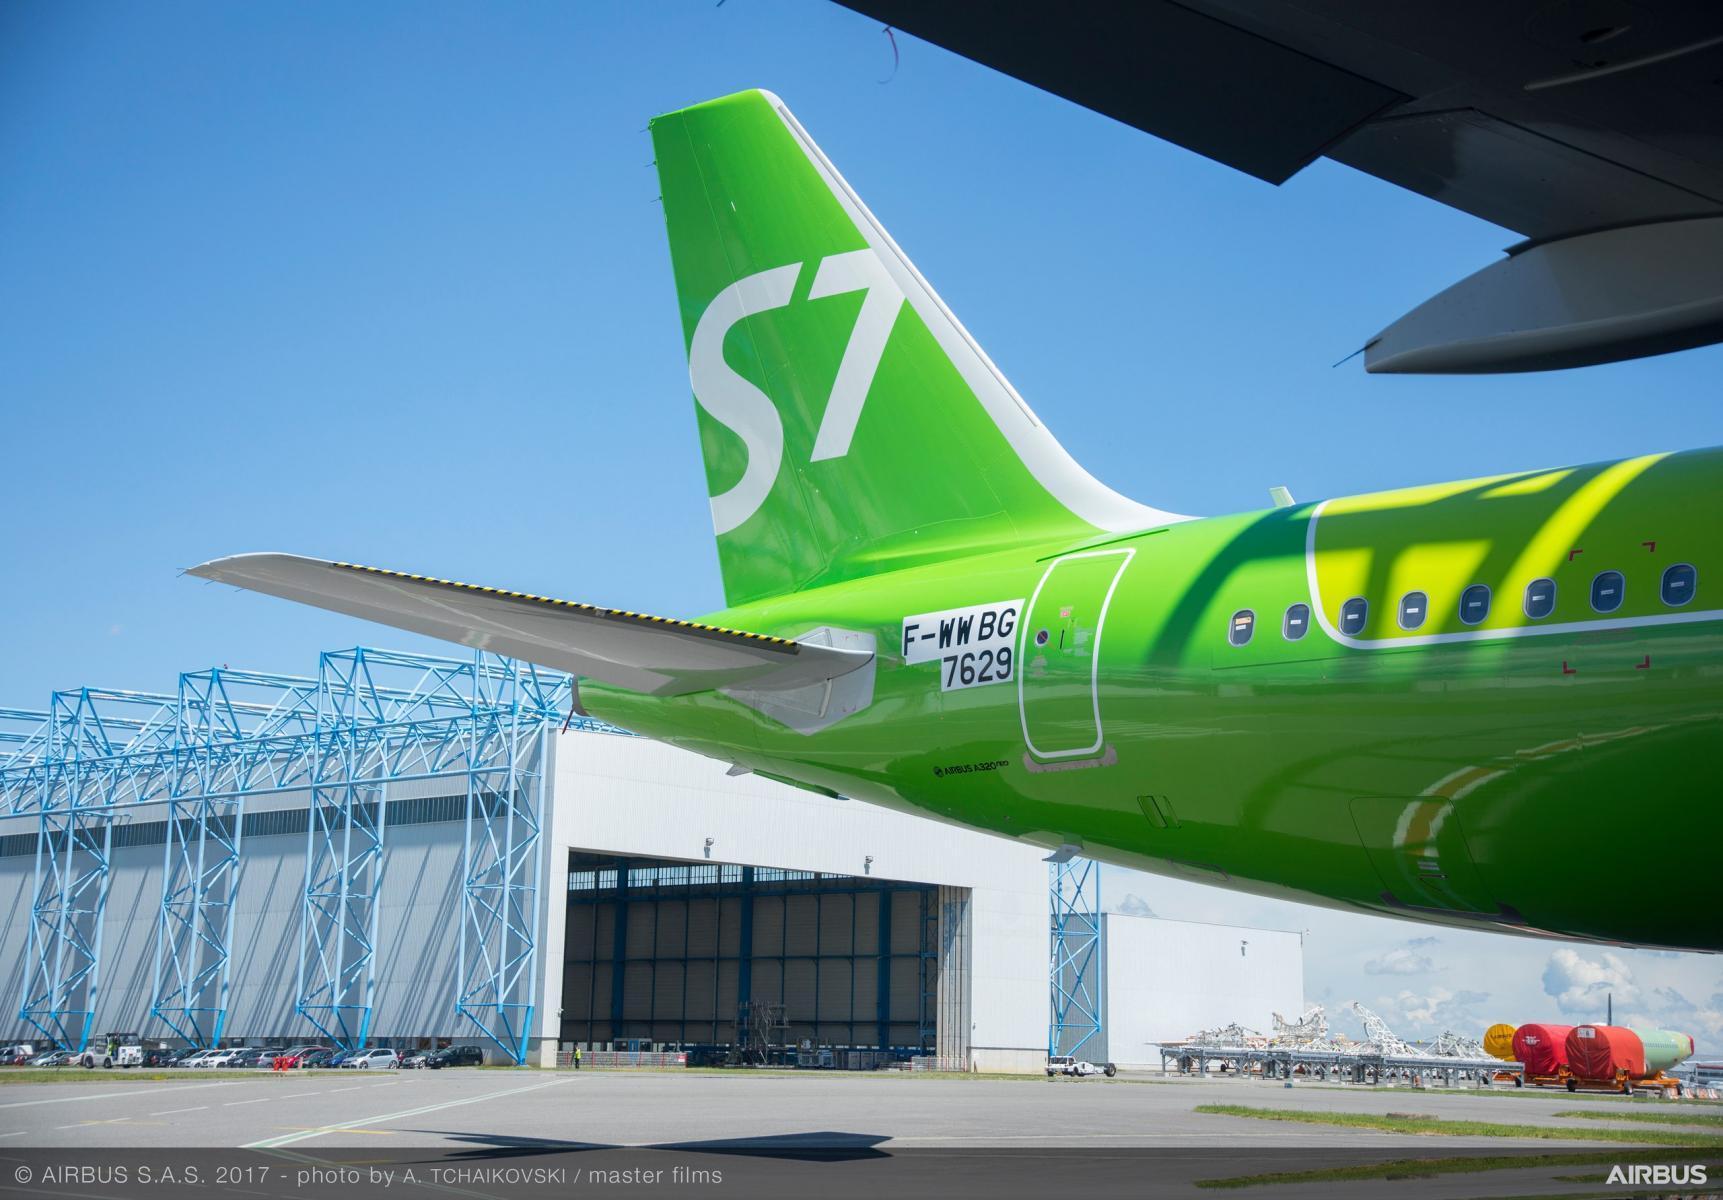 S7 airlines сибирь. S7 Airlines авиакомпания. Авиакомпания Сибирь s7 Airlines. Самолёты авиакомпании s7 Airlines. Самолет Джей Севен.